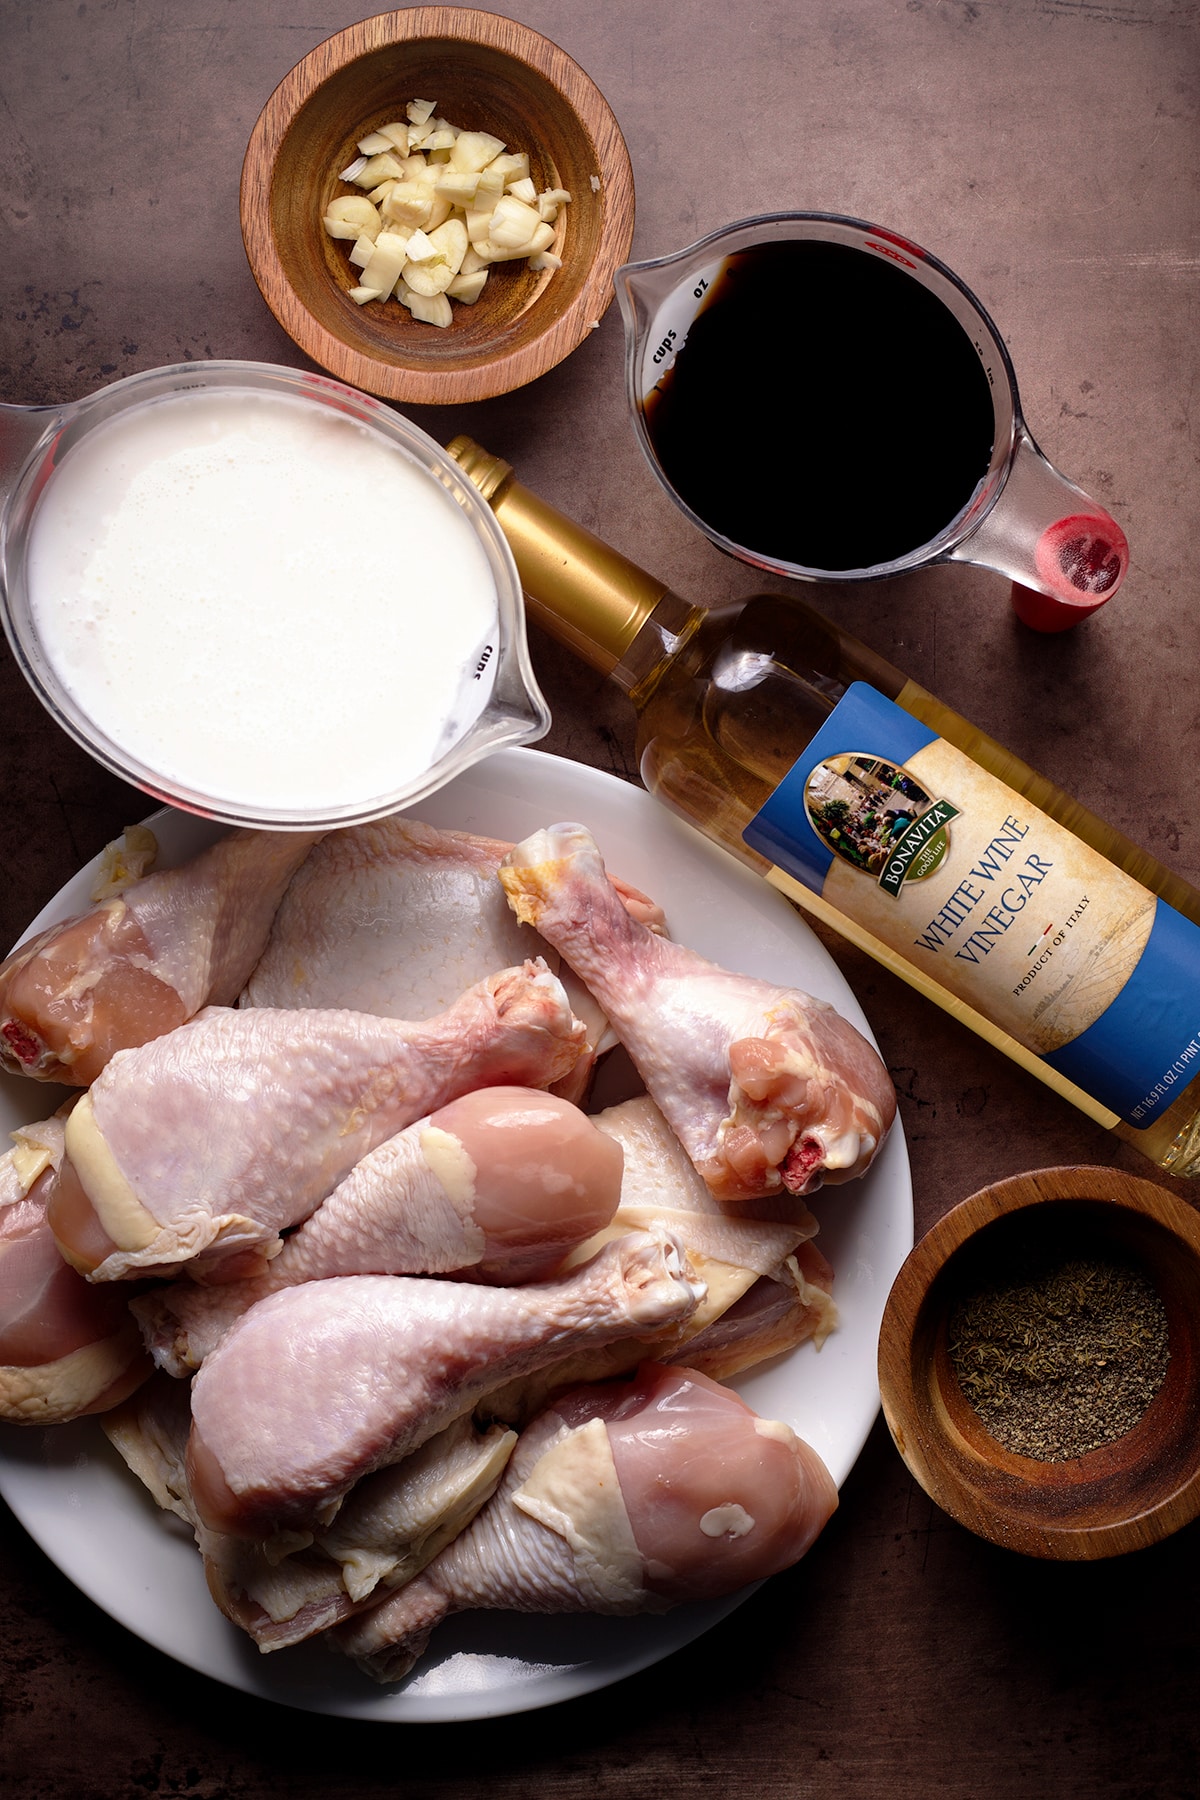 All the ingredients you need to make coconut milk adobo chicken.